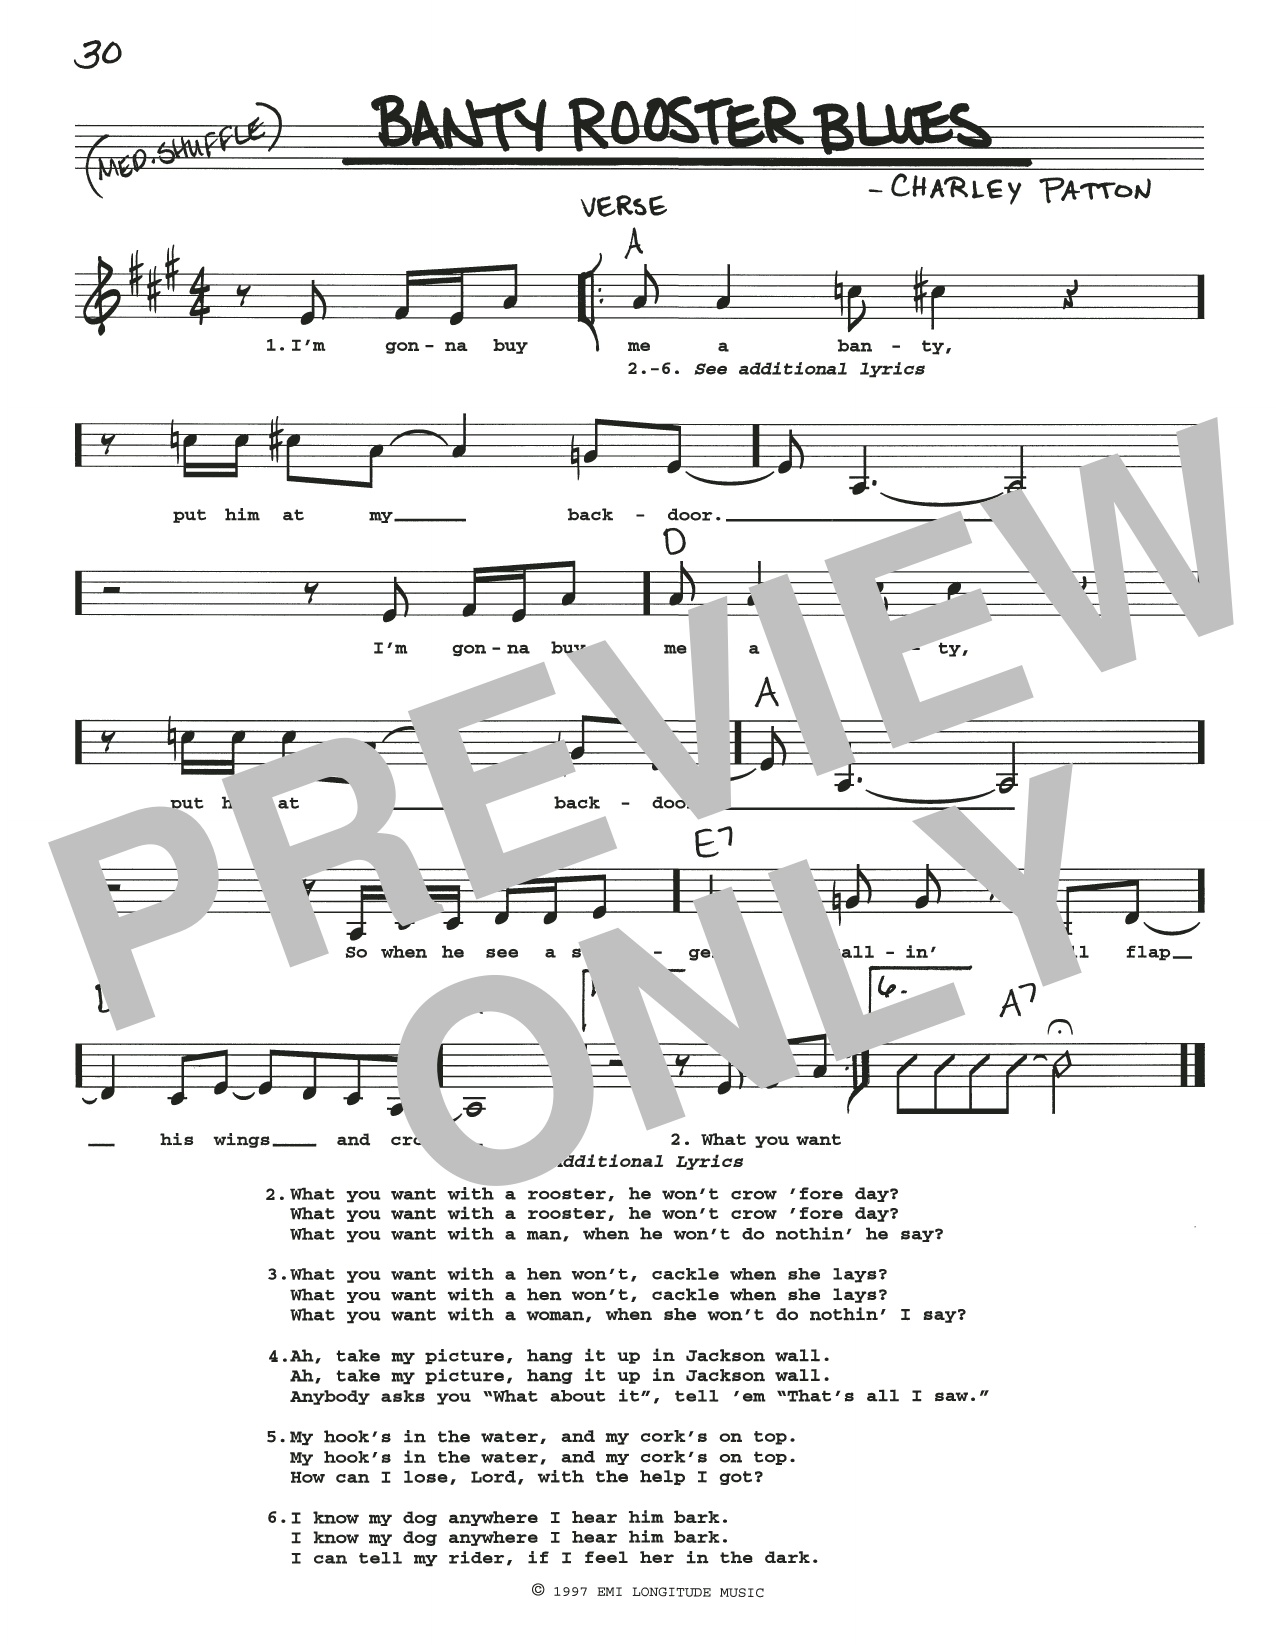 Download Charley Patton Banty Rooster Blues Sheet Music